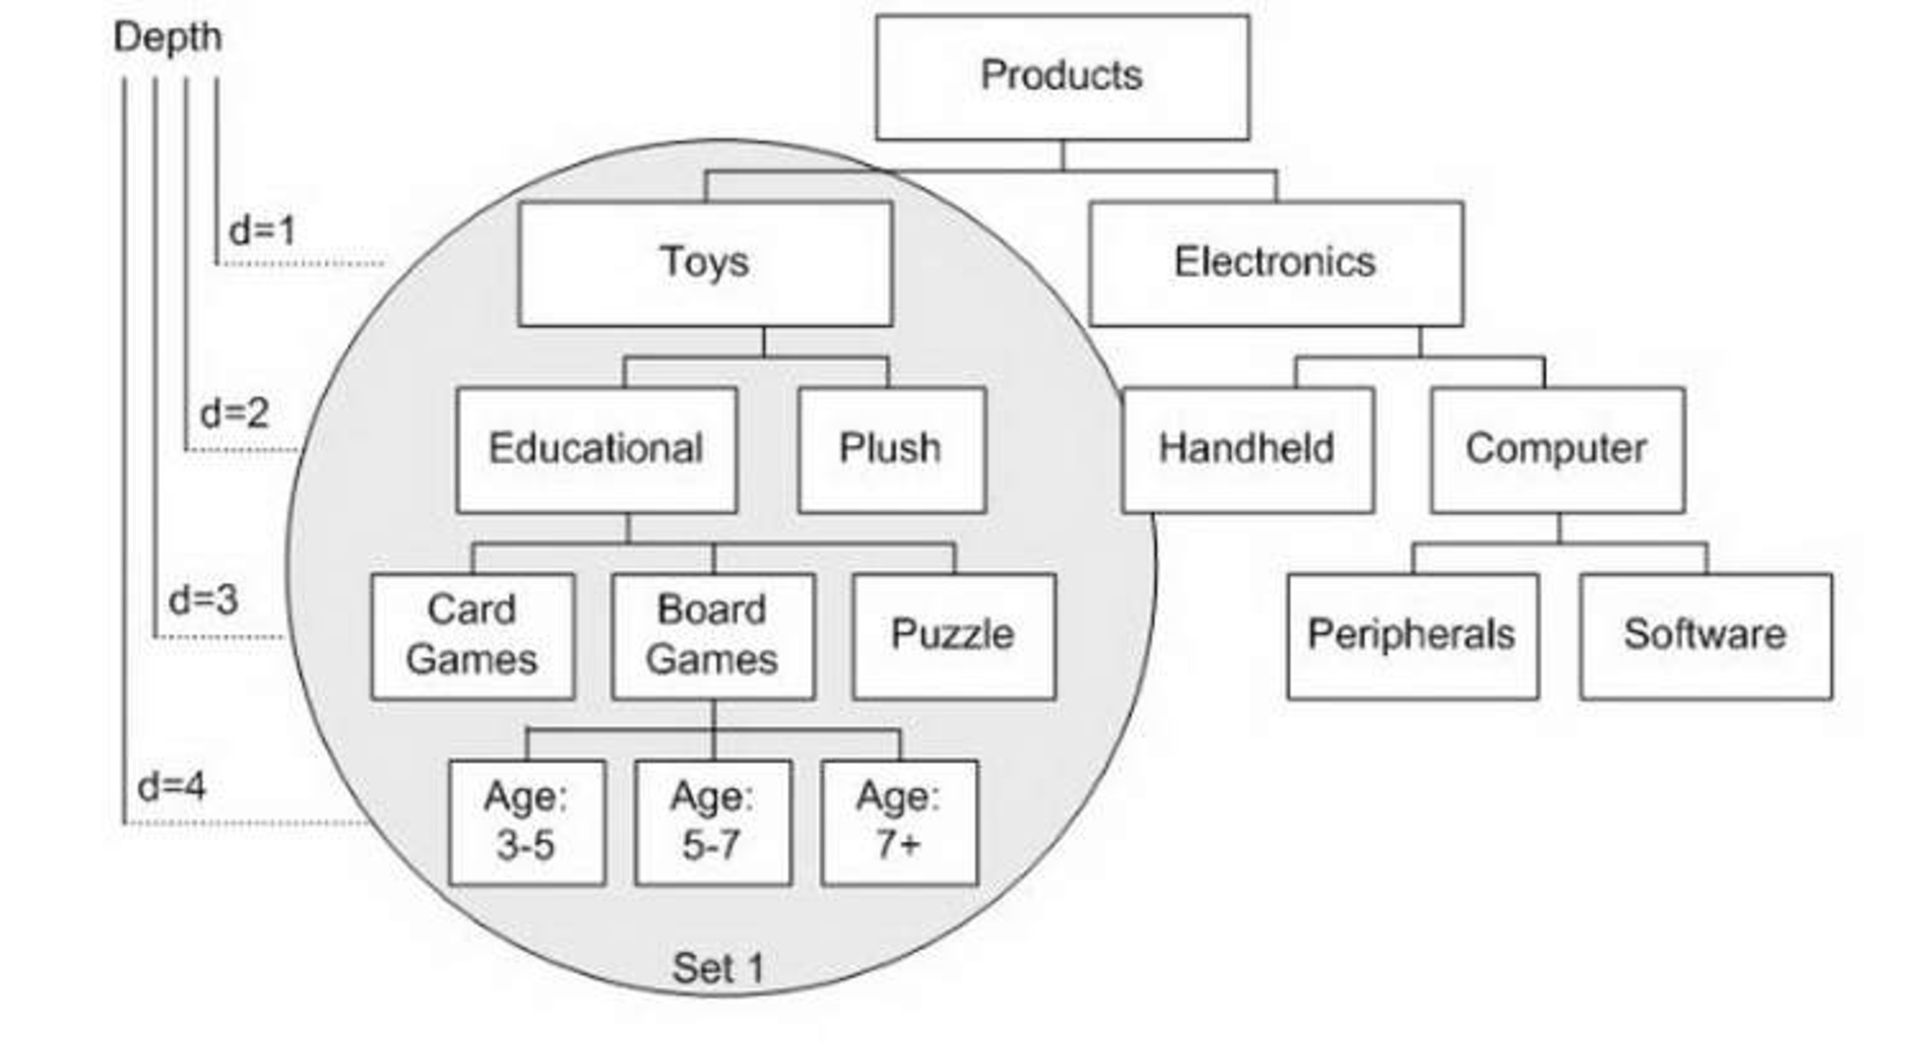 Set and depth in a product taxonomy